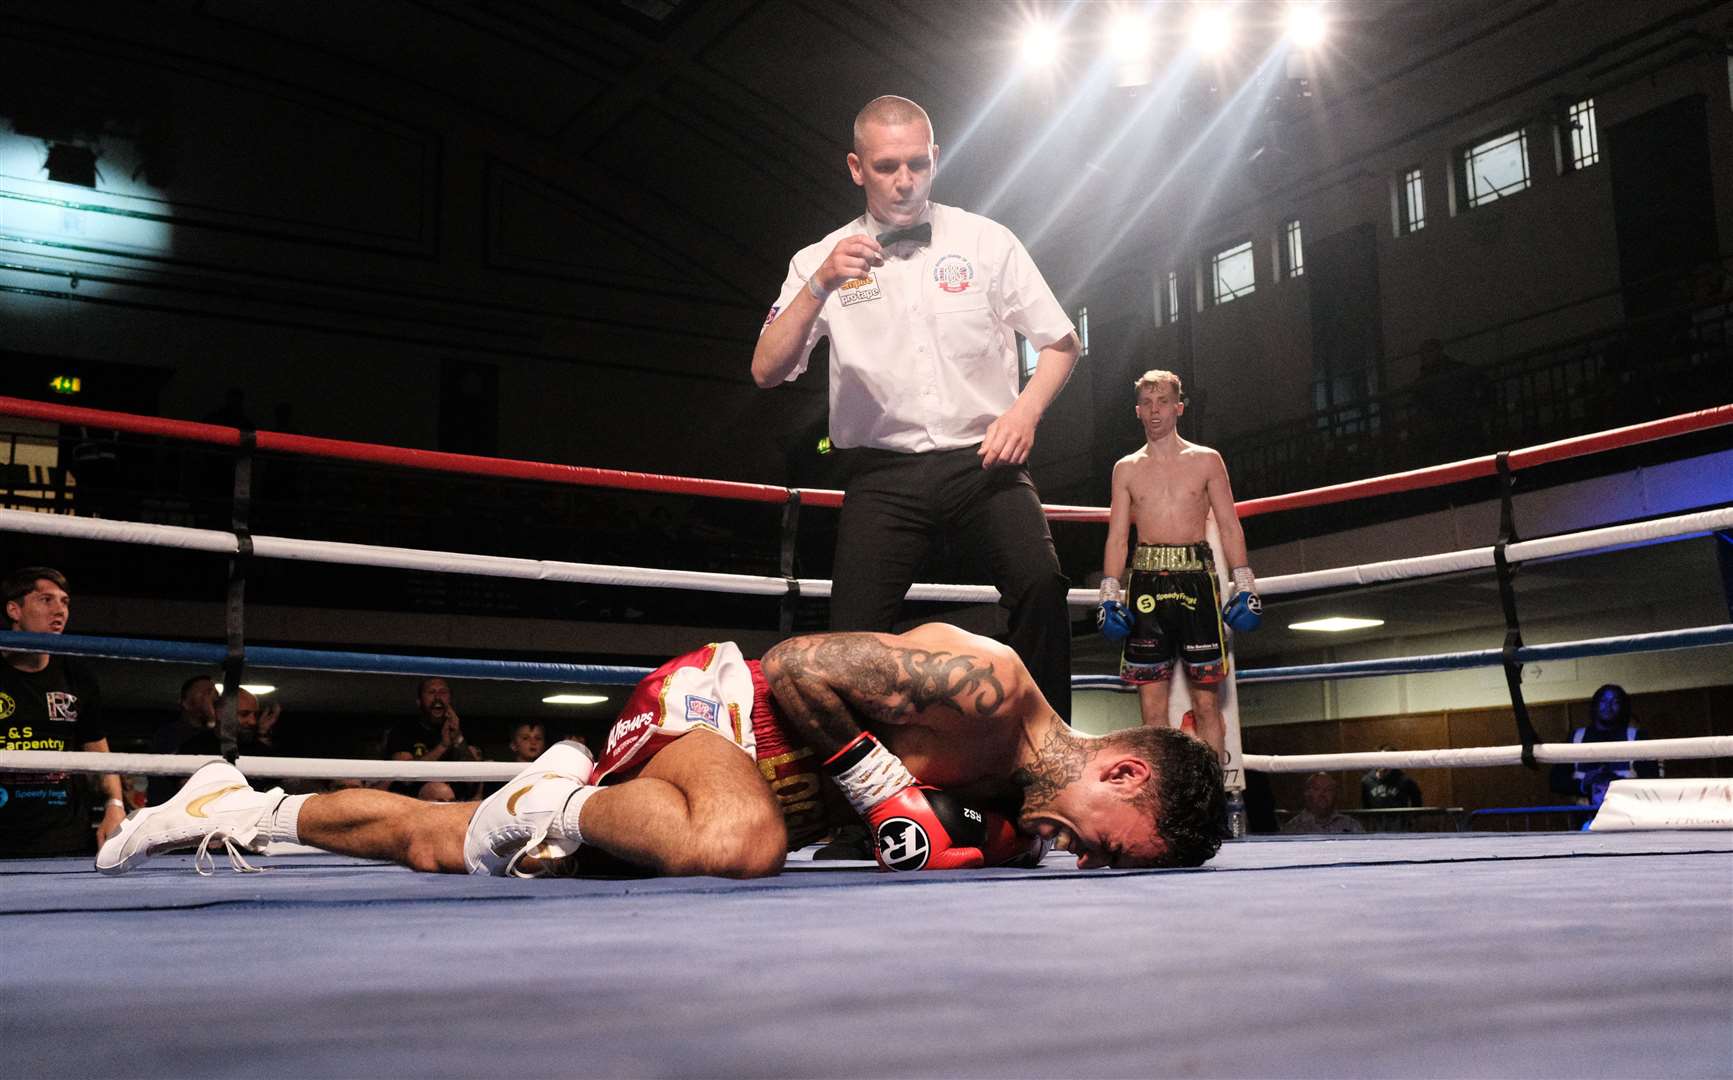 Robert Caswell floors Logan Paling with an uppercut to win at York Hall Picture: hwww.louisjamesphoto.com